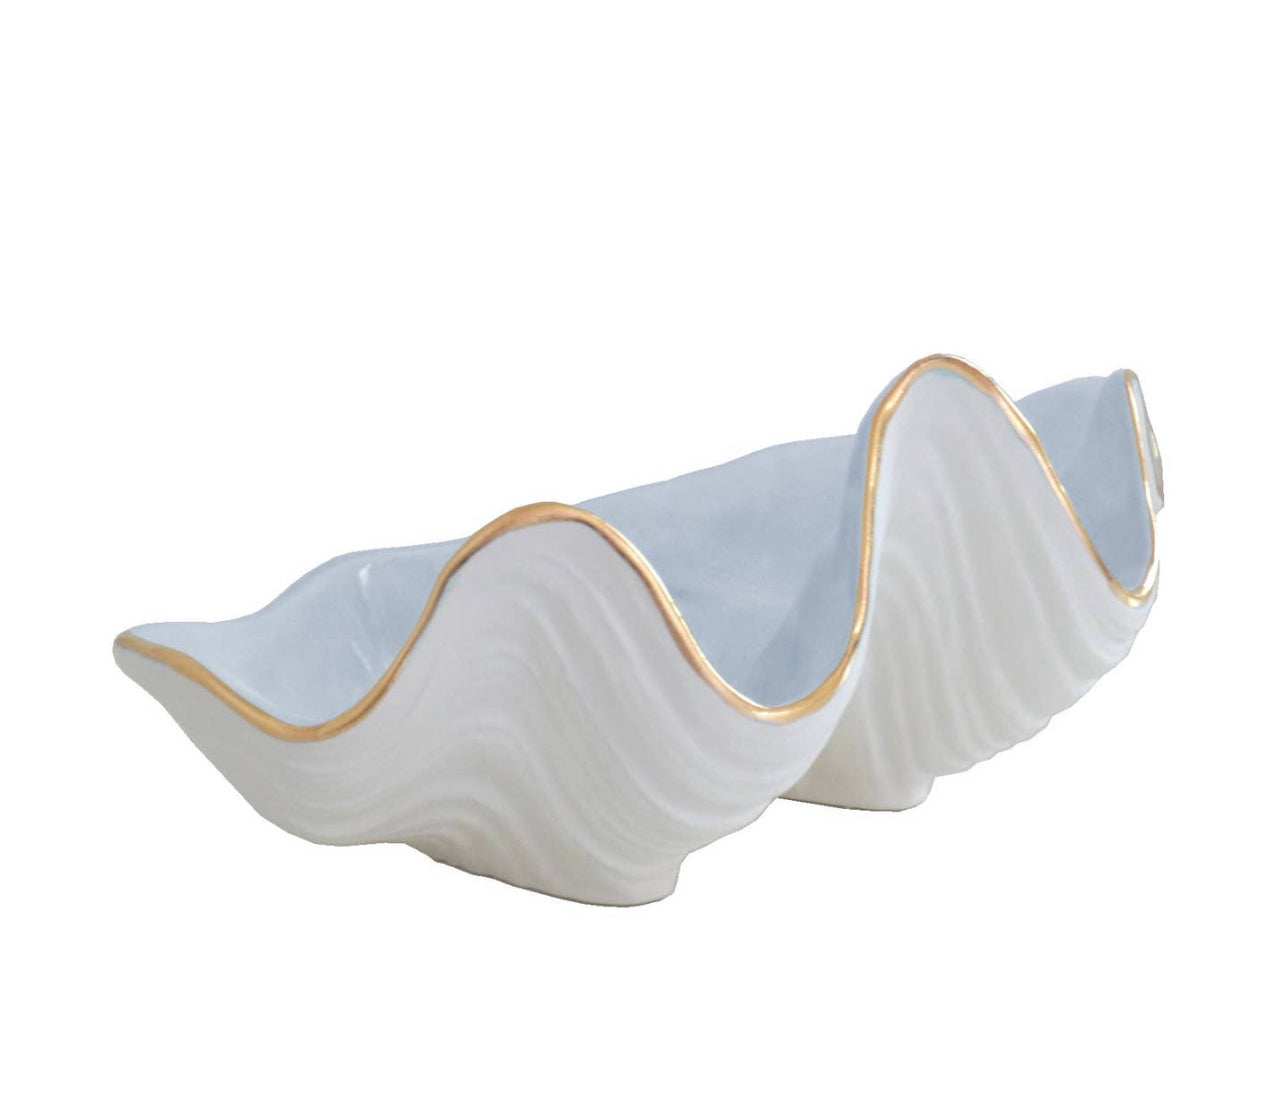 Shell Bowl with 22K Gold Accent -Small / Pale Sheer Blue